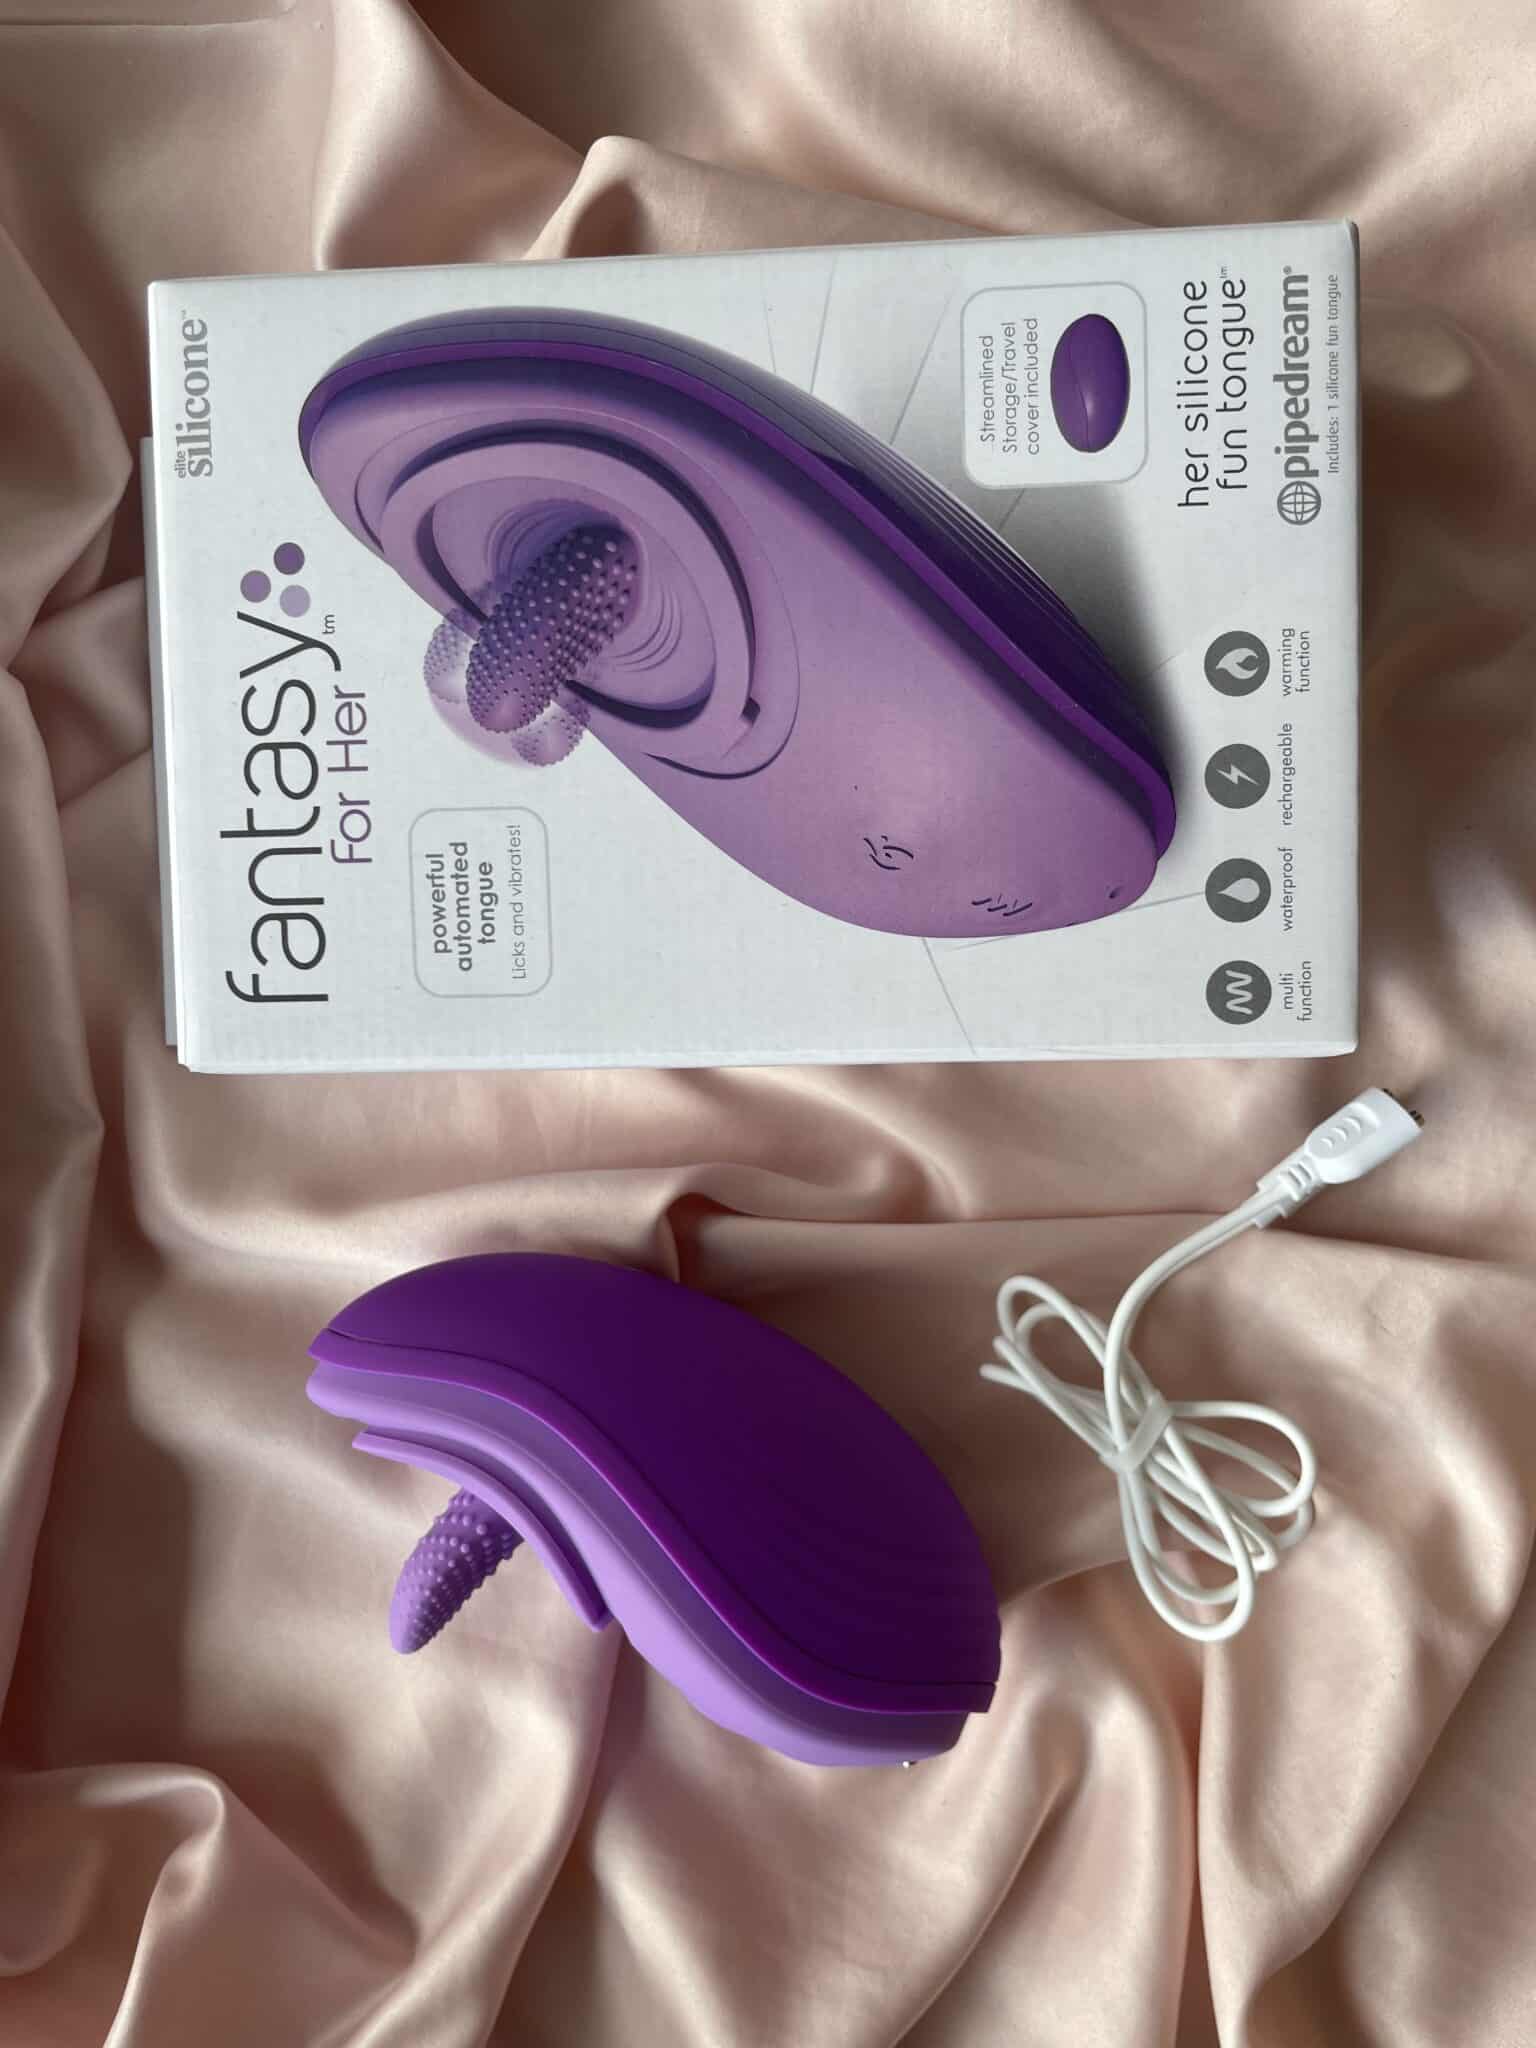 Fantasy For Her - Her Silicone Fun Tongue Evaluating the Fantasy For Her - Her Silicone Fun Tongue’s packaging